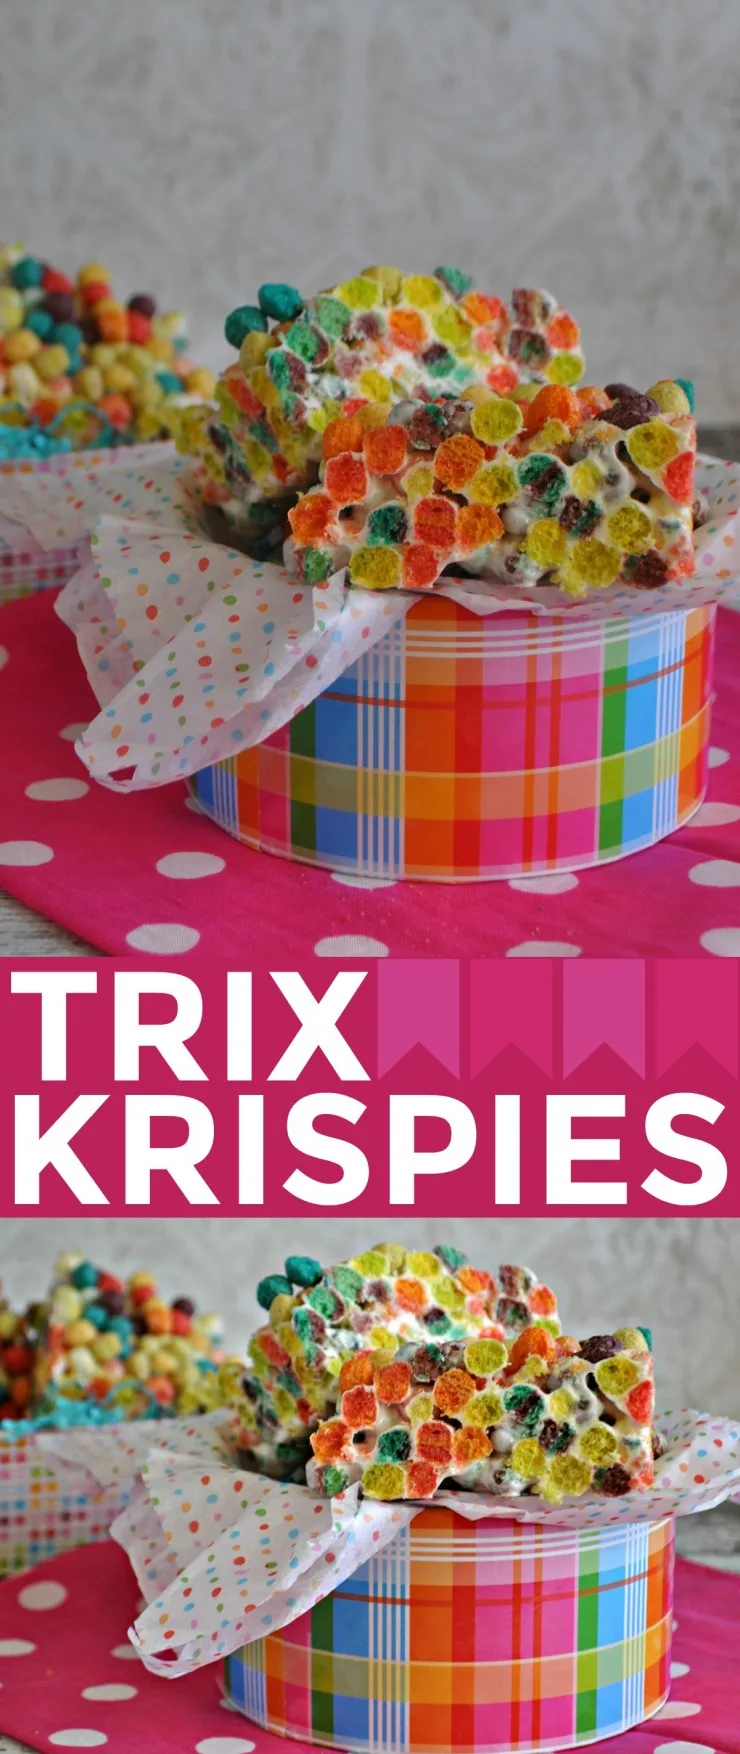 This Trix Krispies Recipe results in fun and vibrant cereal treat bars that are full of flavours kids are sure to enjoy! Fun Easter Dessert idea!